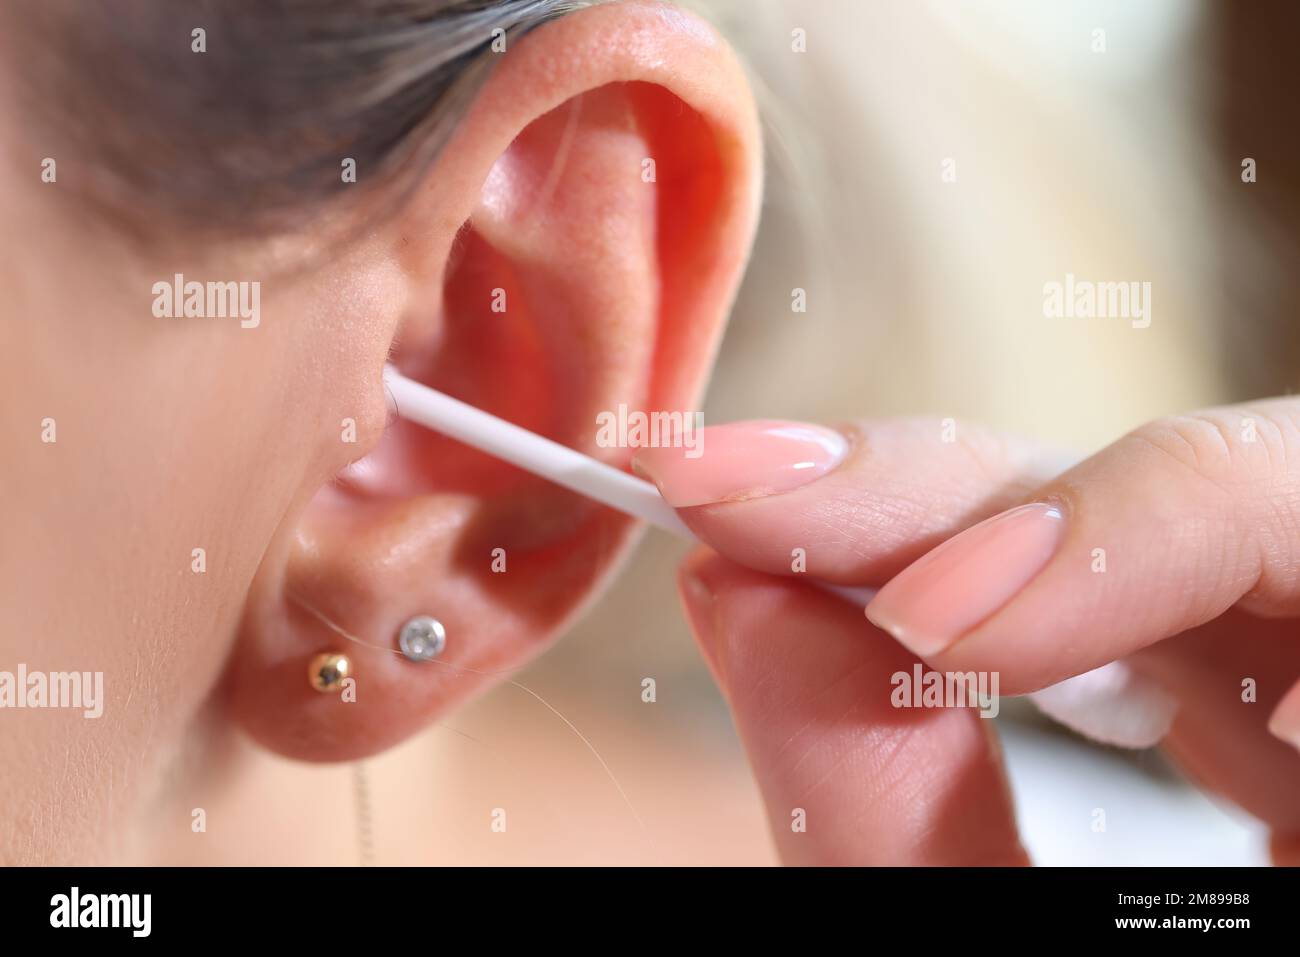 Close up of women cleans her ear with cotton swab. Stock Photo